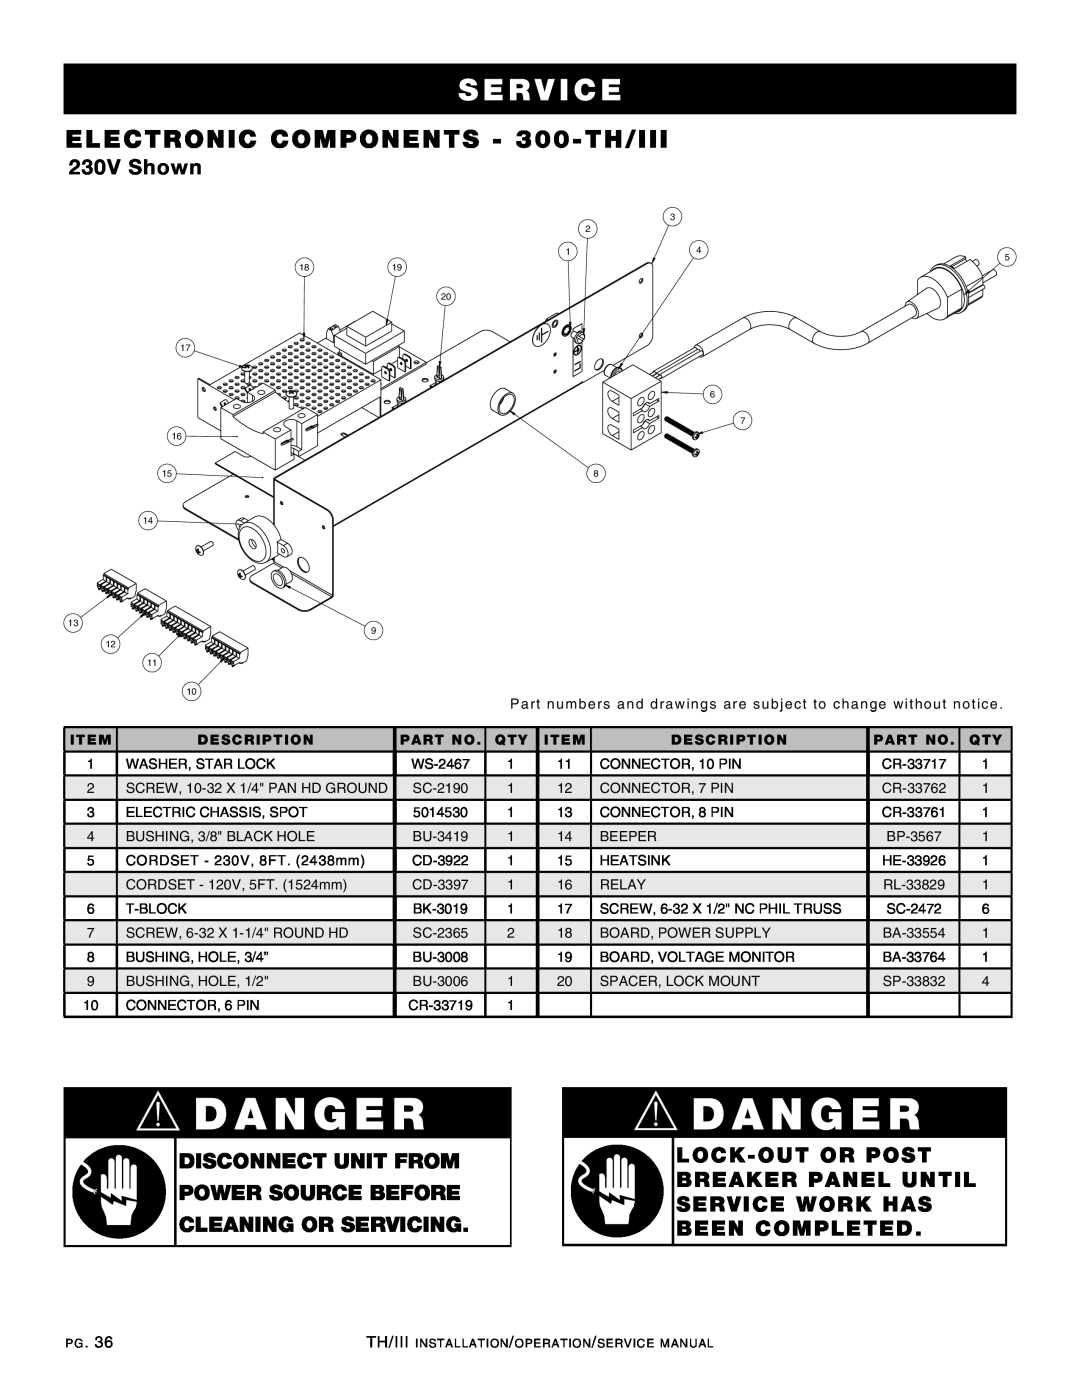 Alto-Shaam 1200-TH/III manual ELECTRONIC COMPONENTS - 300-TH/III, 230V Shown, dANgER, Se r v ice, cLEANINg OR SERVIcINg 